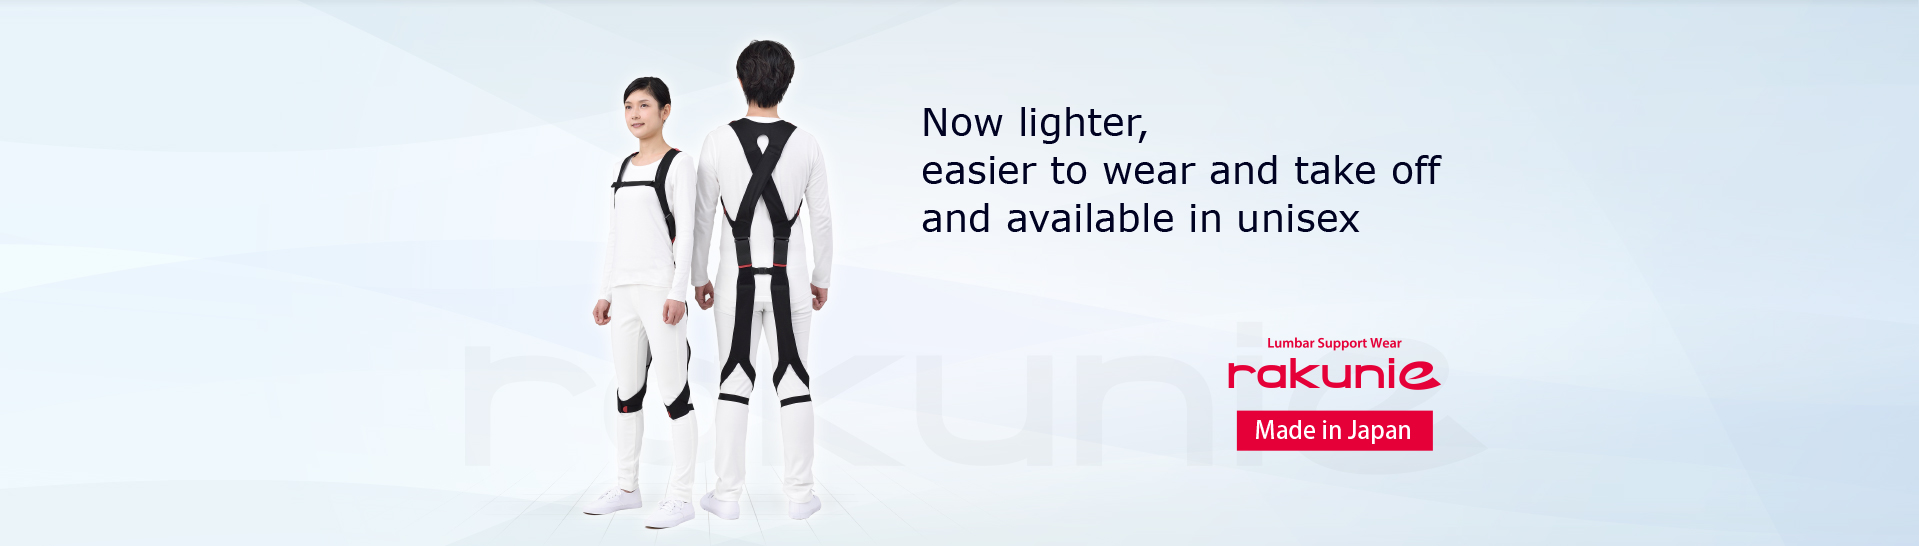 Now lighter, easier to wear and take off and available in unisex